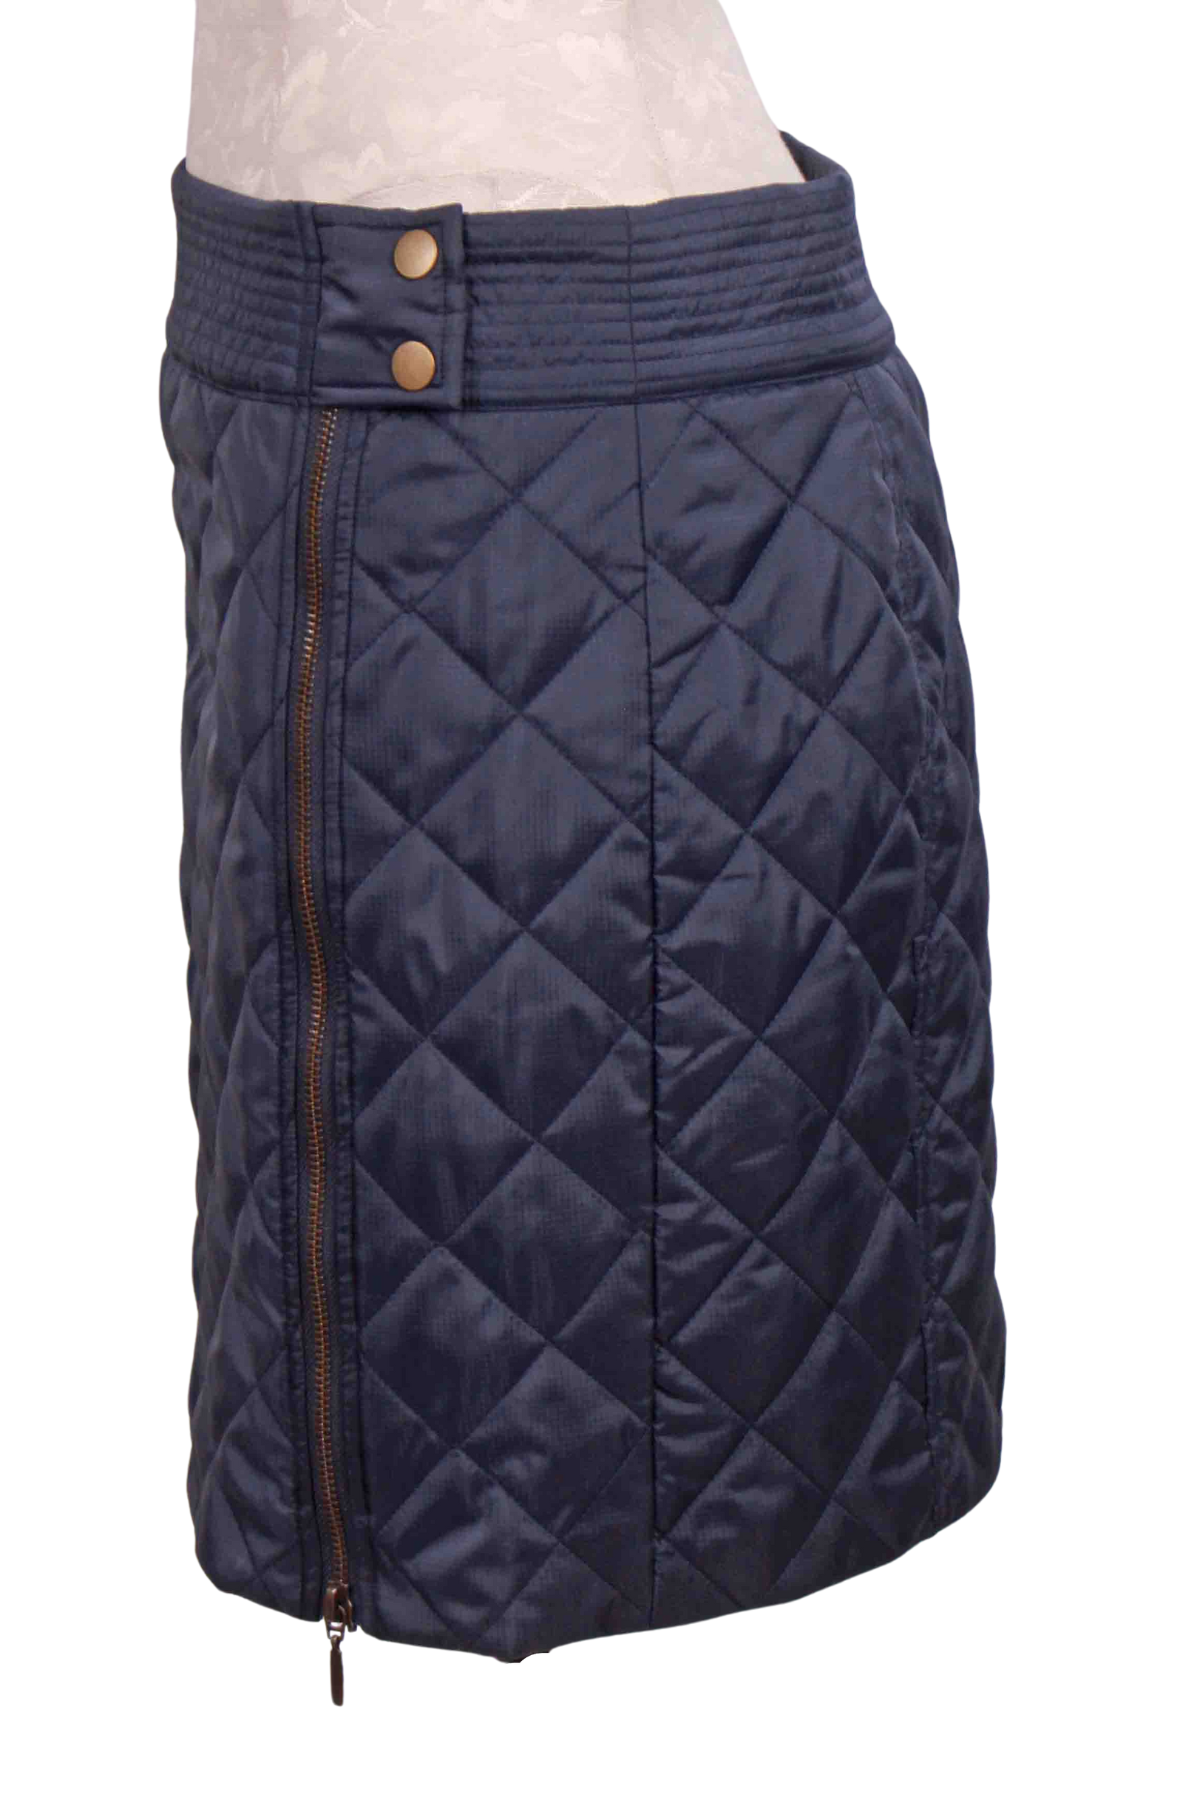 side view of Midnight Navy colored Quilted Jette Skirt by Marie Oliver